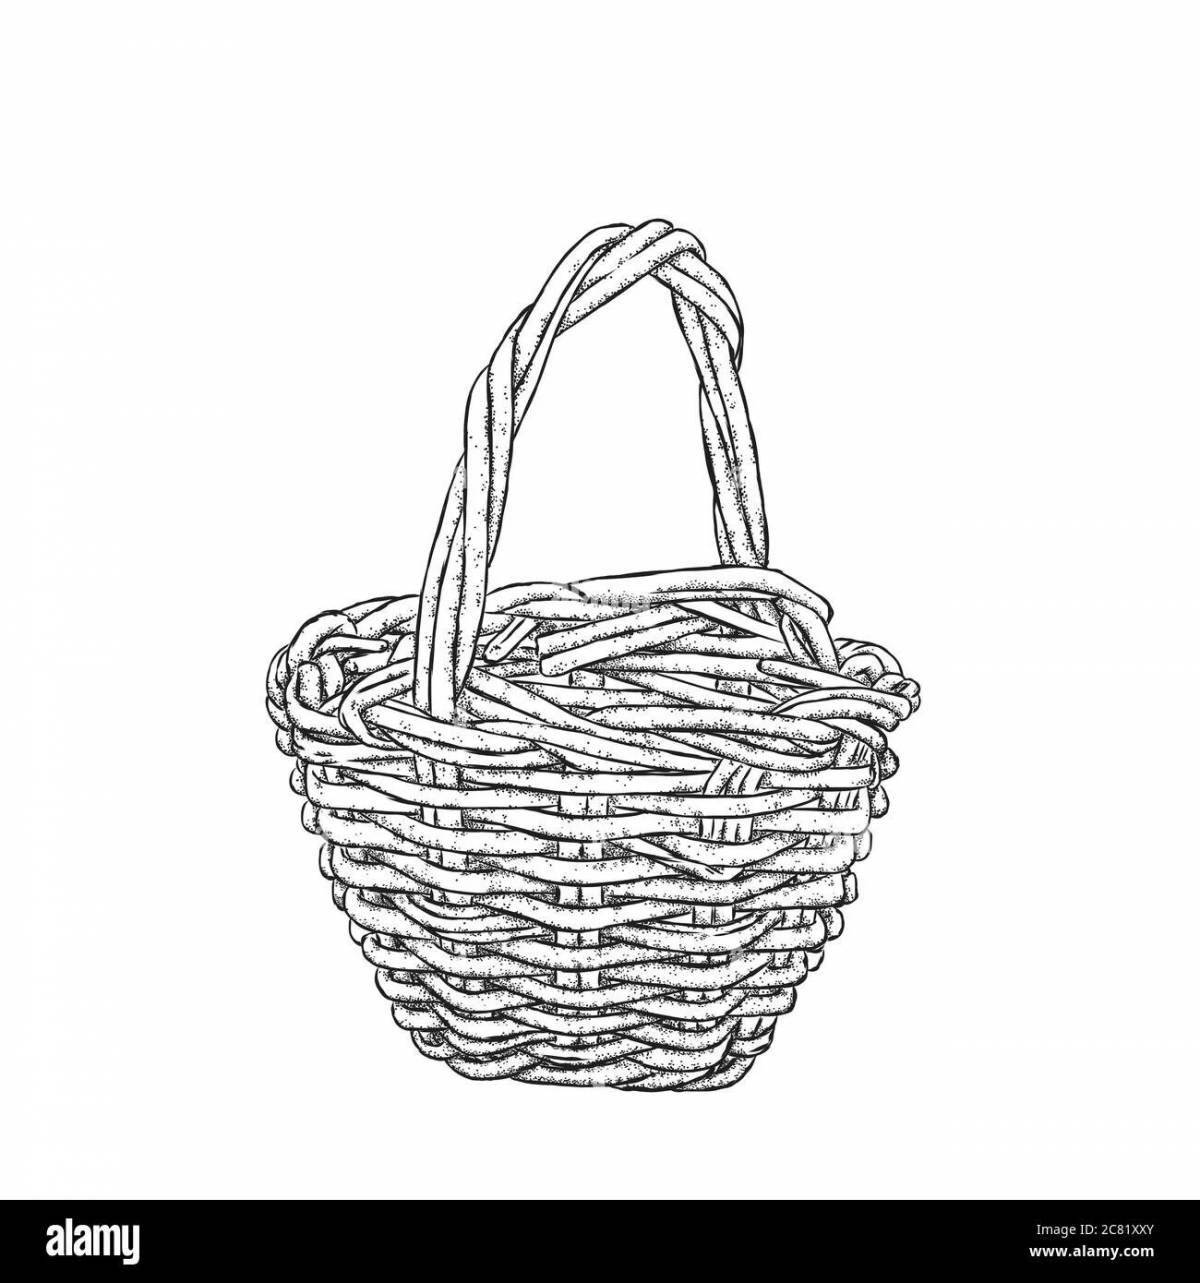 Cute empty basket coloring book for kids